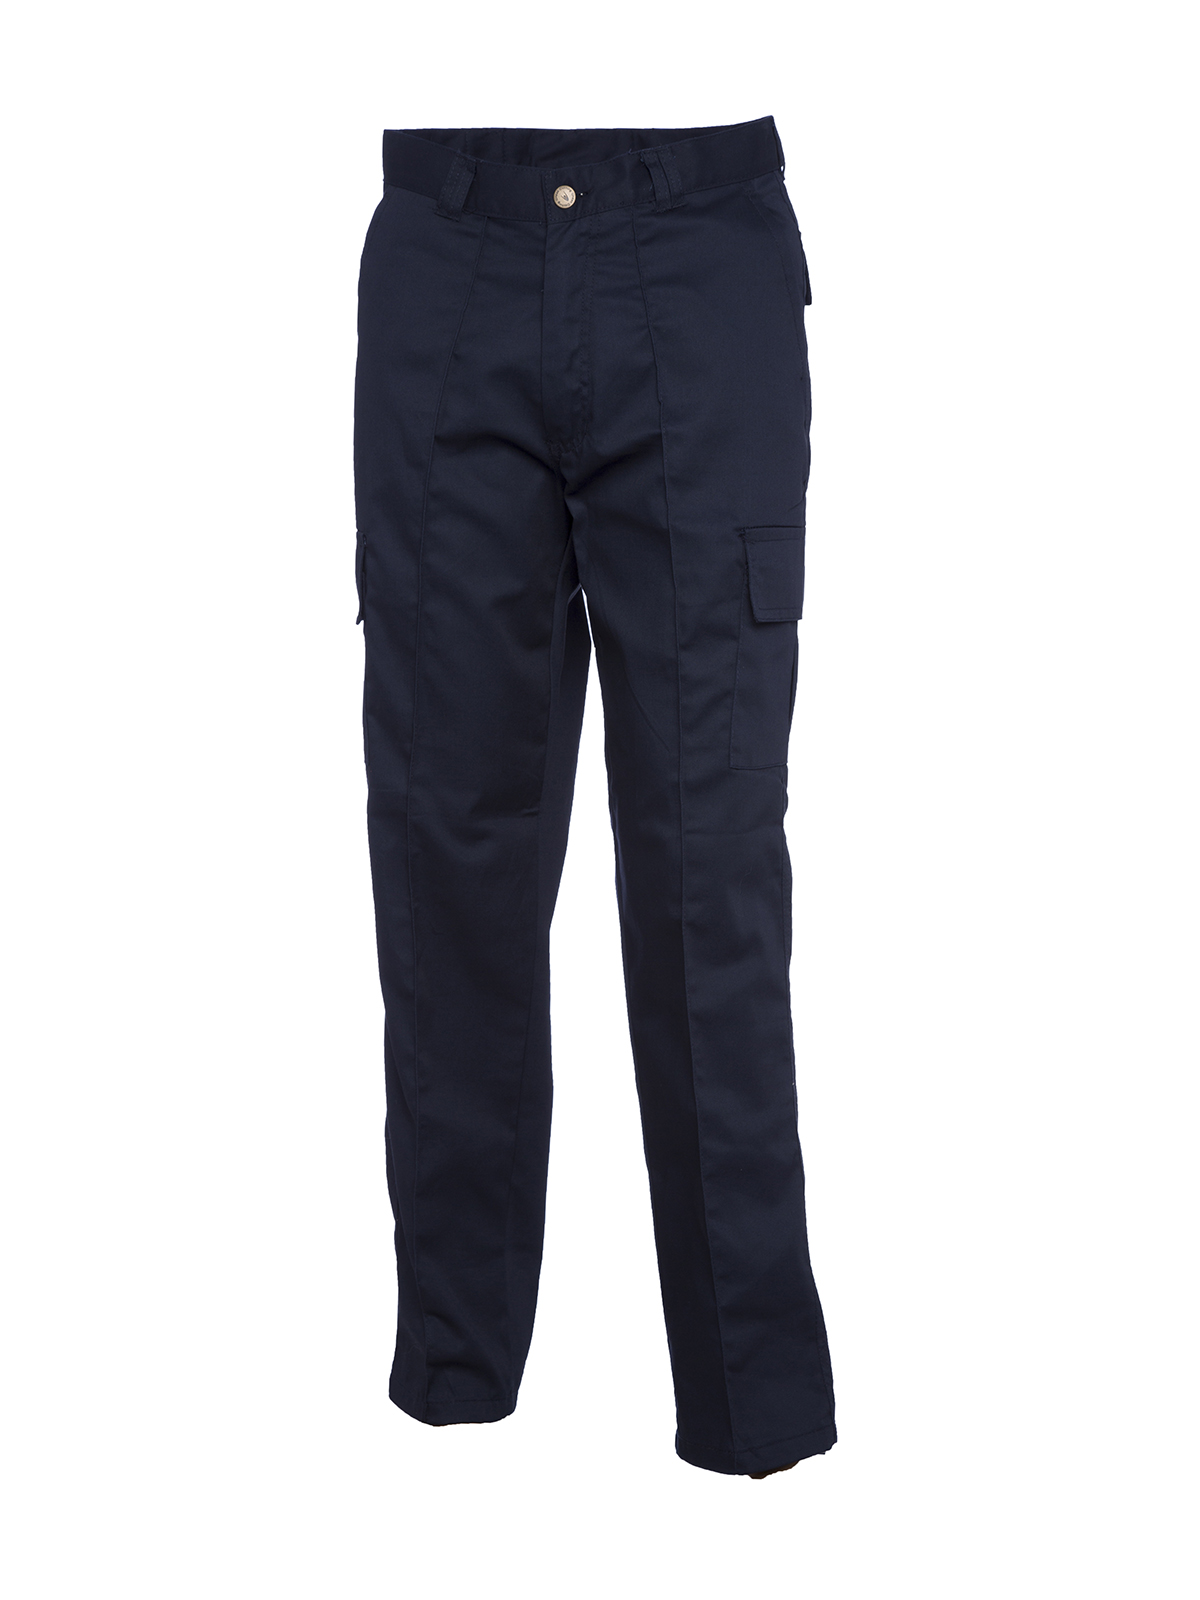 Cargo Trousers, Navy Blue - 46R